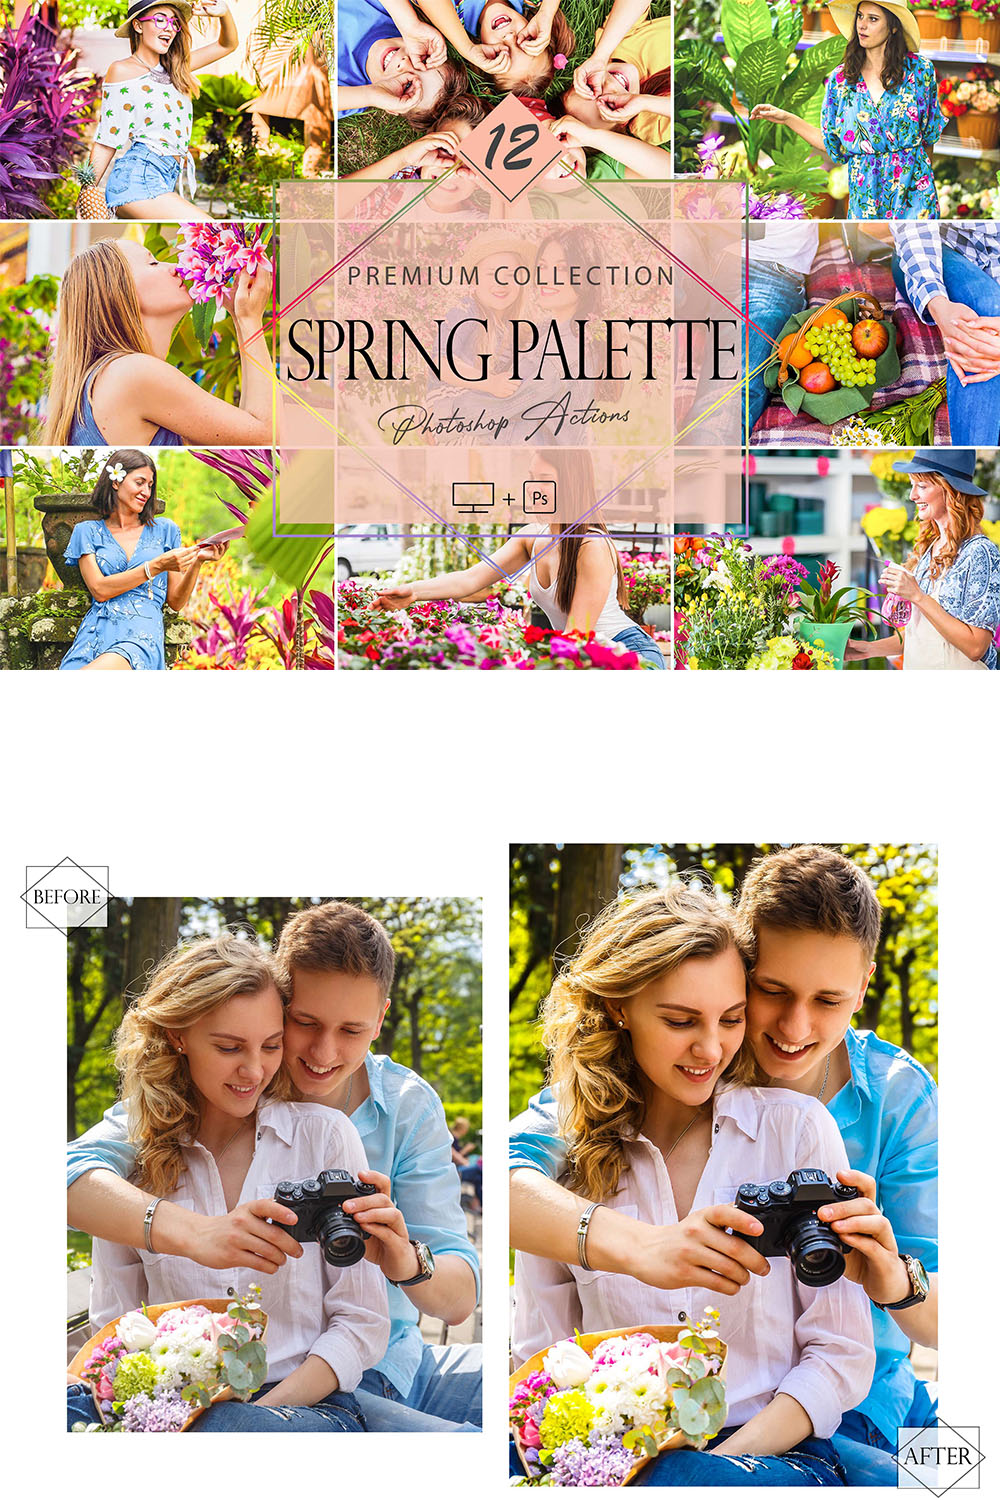 12 Photoshop Actions, Spring Palette Ps Action, Green ACR Preset, Bright Filter, Lifestyle Theme For Instagram, Colorful Presets, Warm Portrait pinterest preview image.